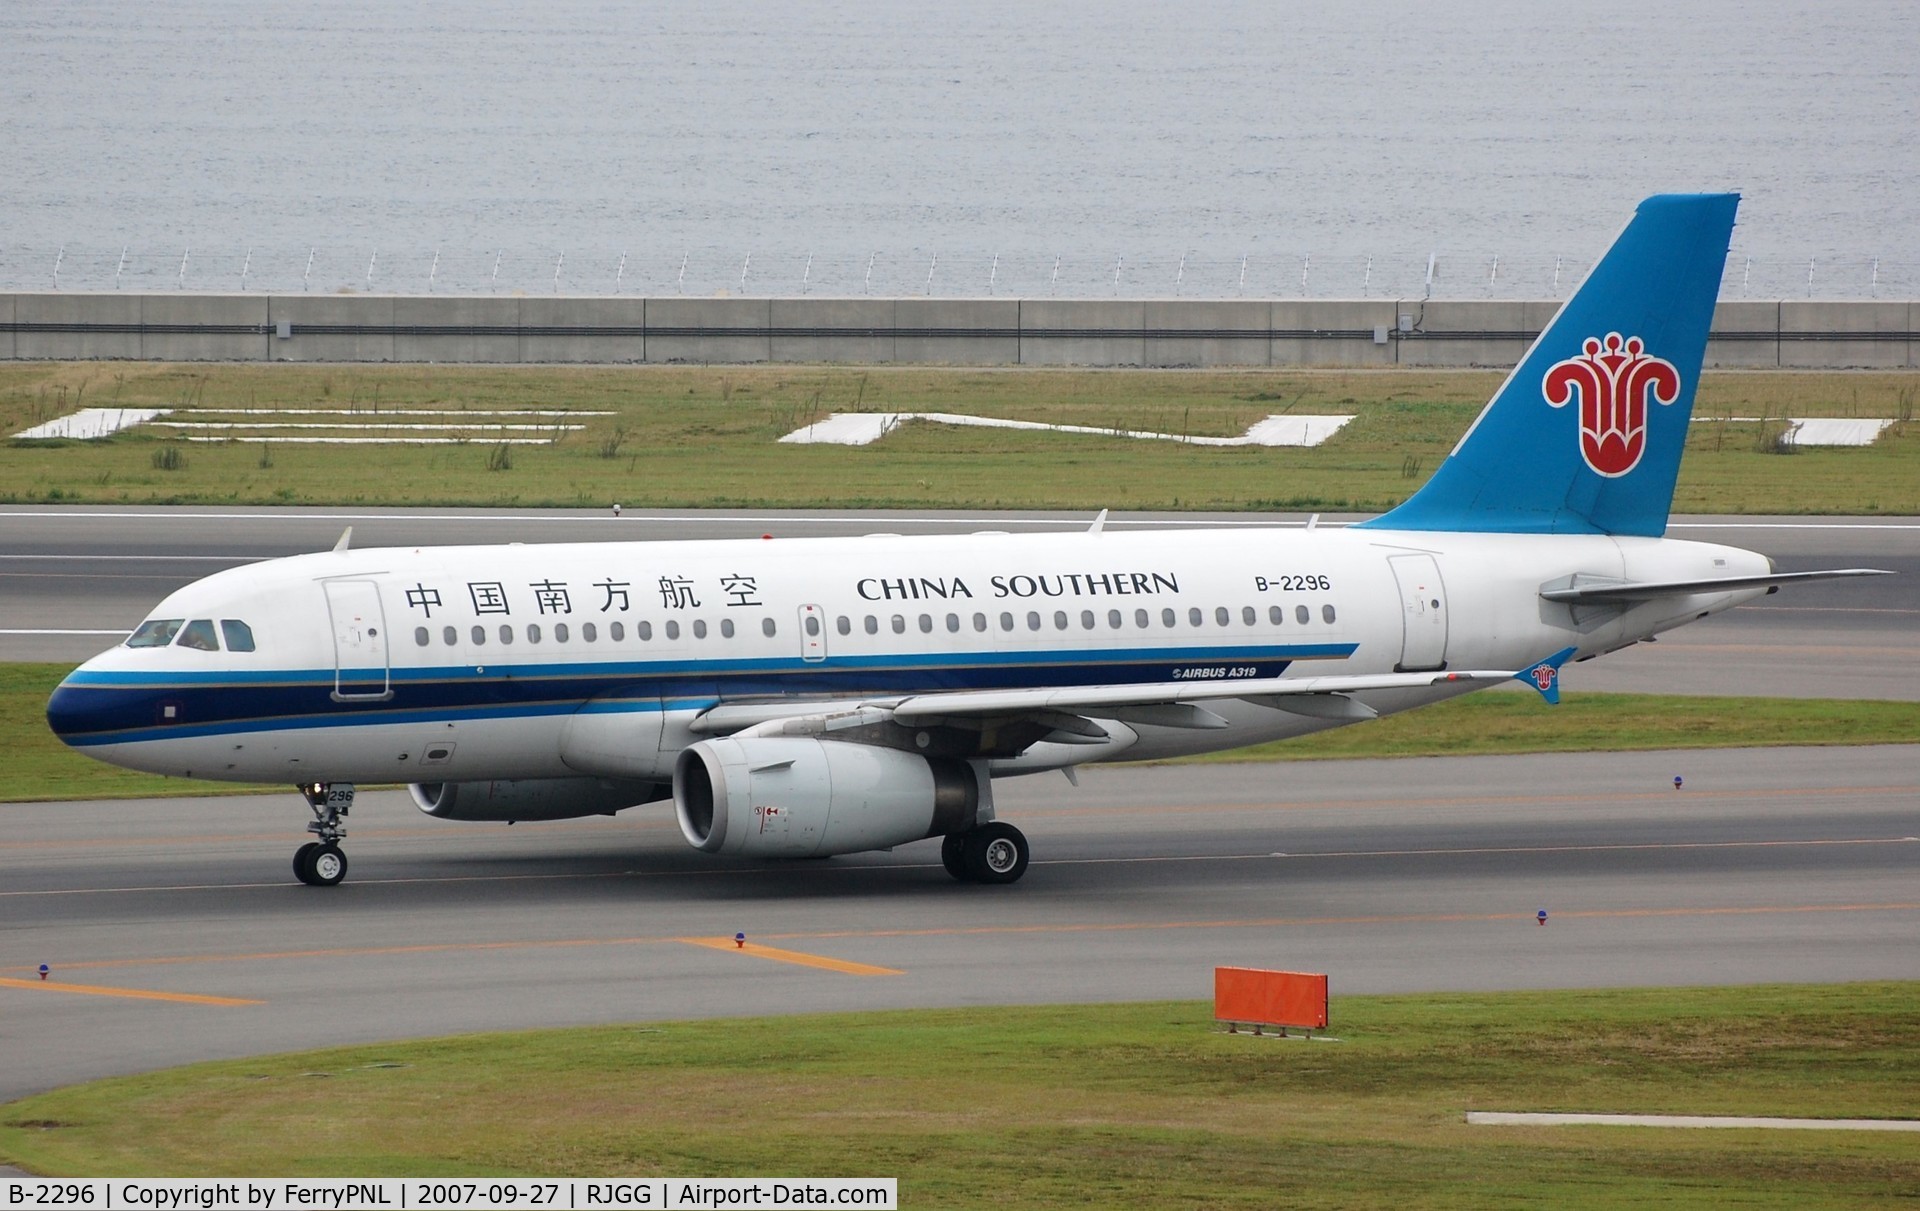 B-2296, 2005 Airbus A319-132 C/N 2426, China Southern A319 in NGO